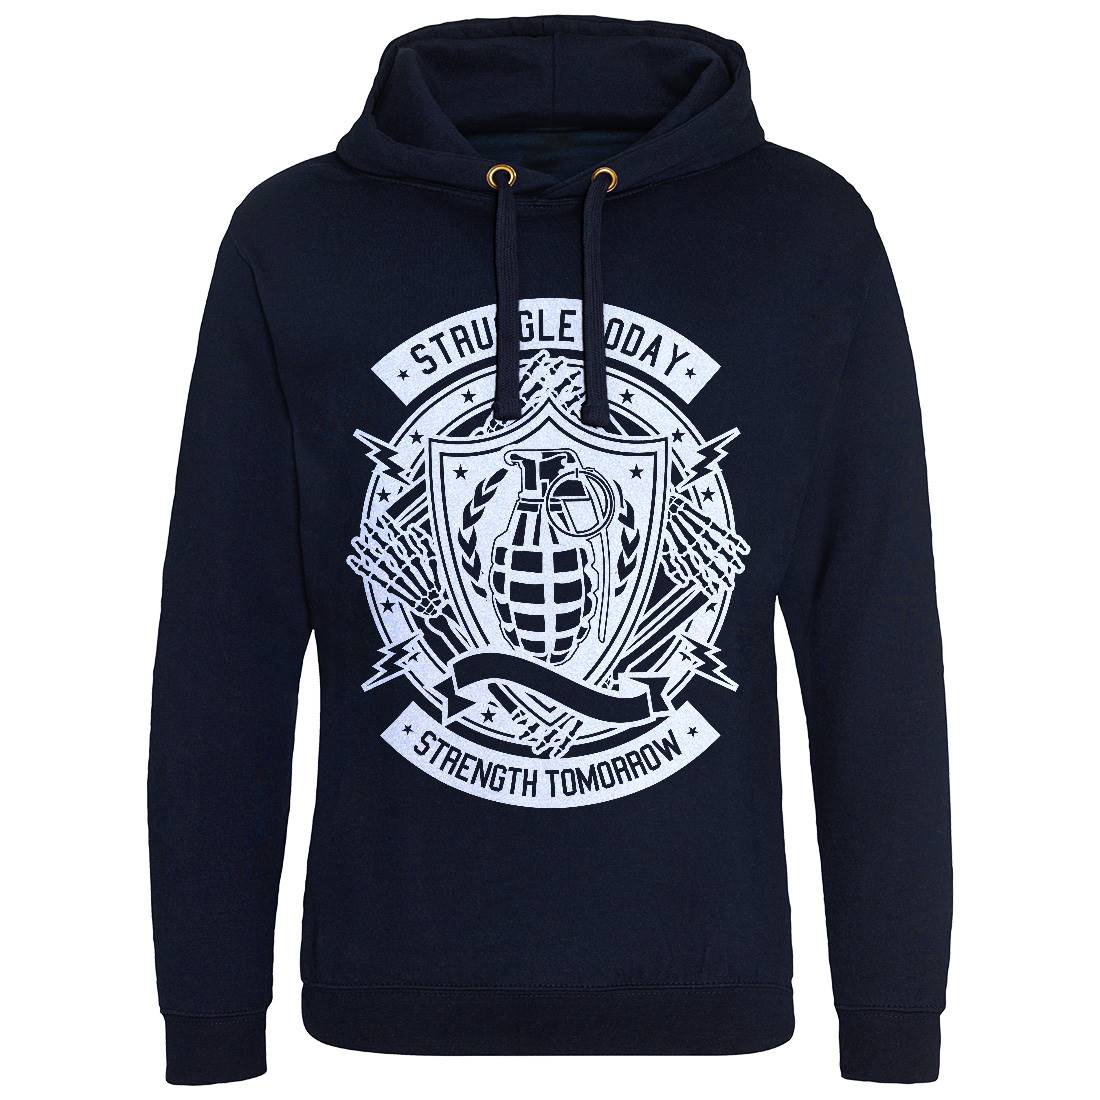 Struggle Today Mens Hoodie Without Pocket Gym A291